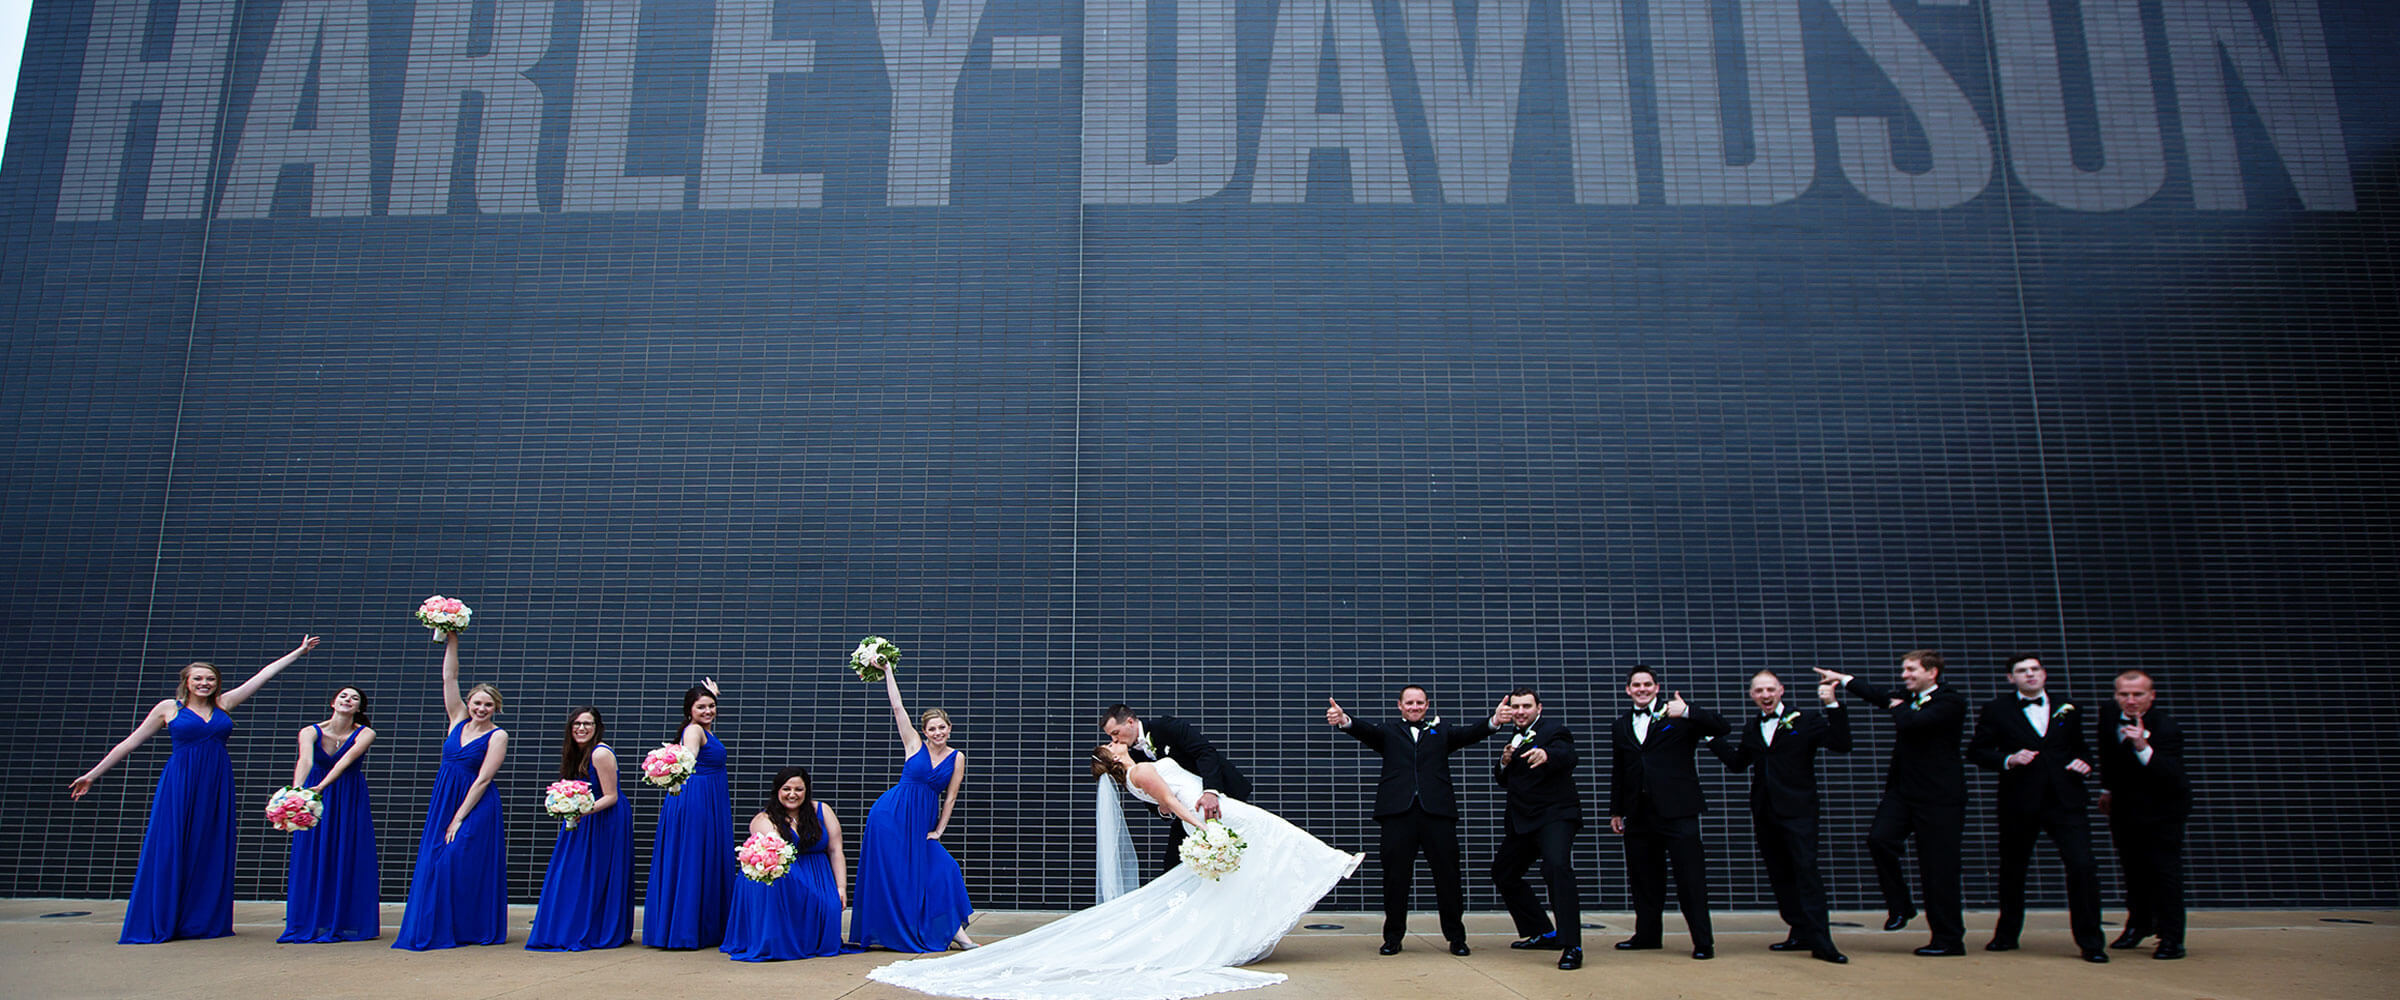 Weddings at 1903 Events at the Harley Davidson Museum